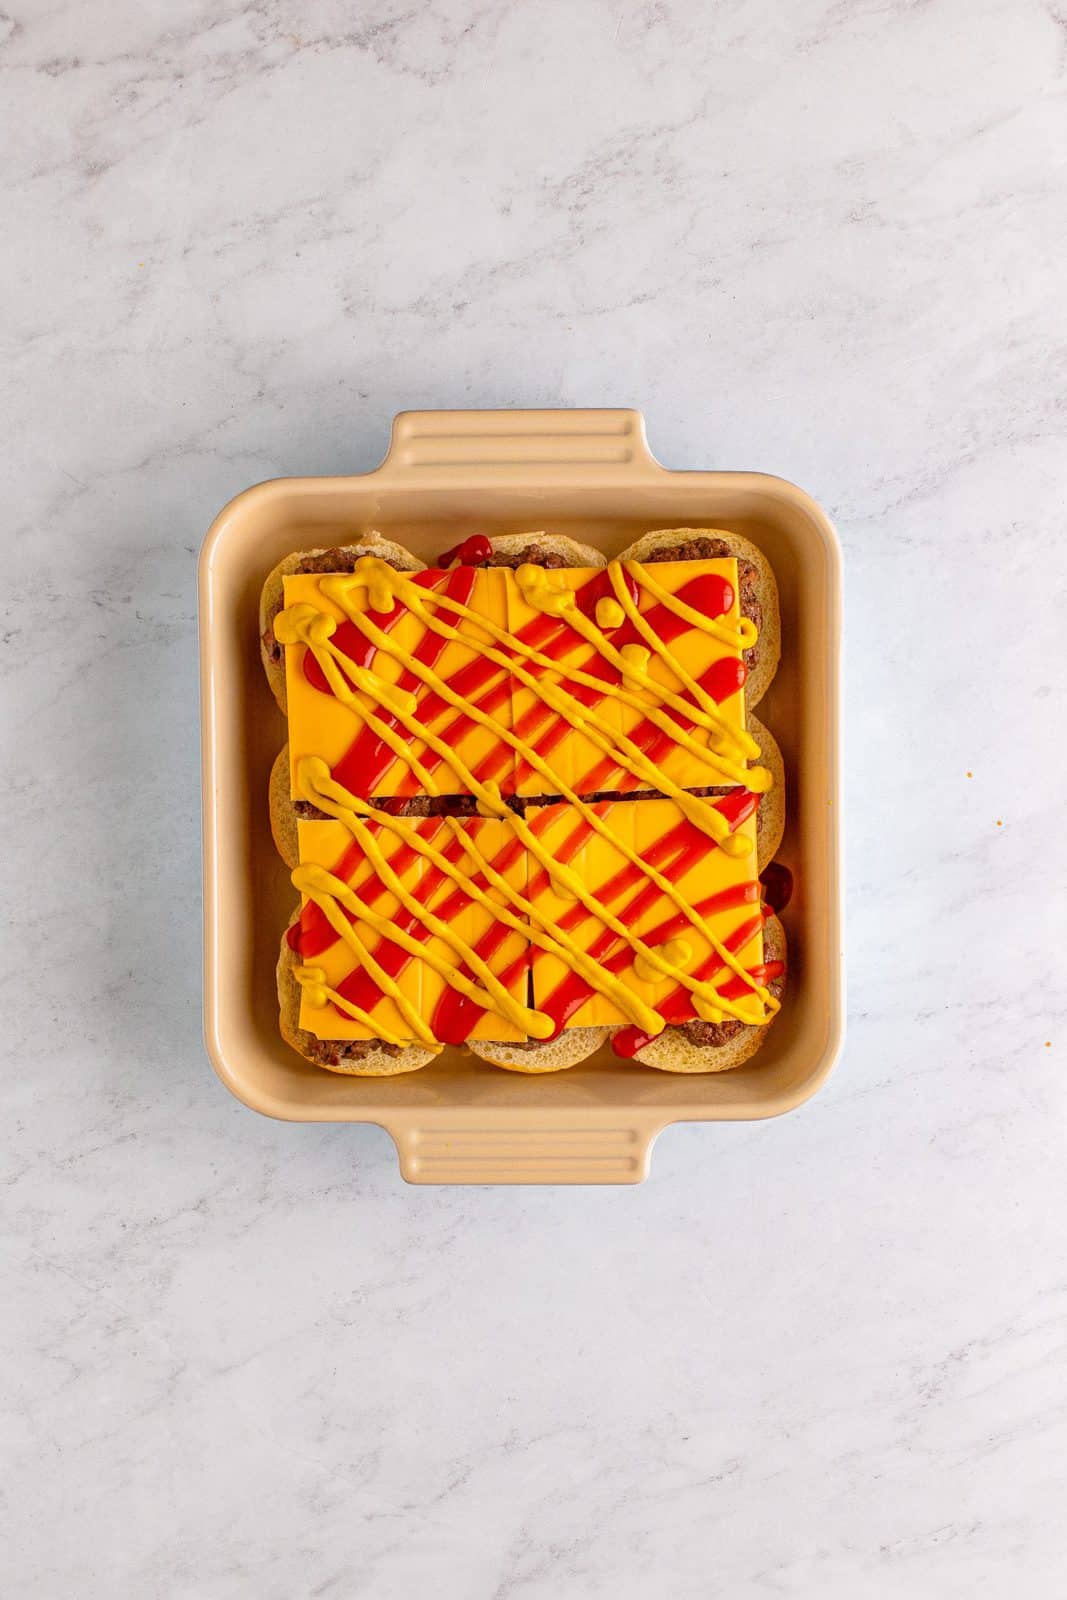 Ketchup and mustard added to the top of the cheese slices.